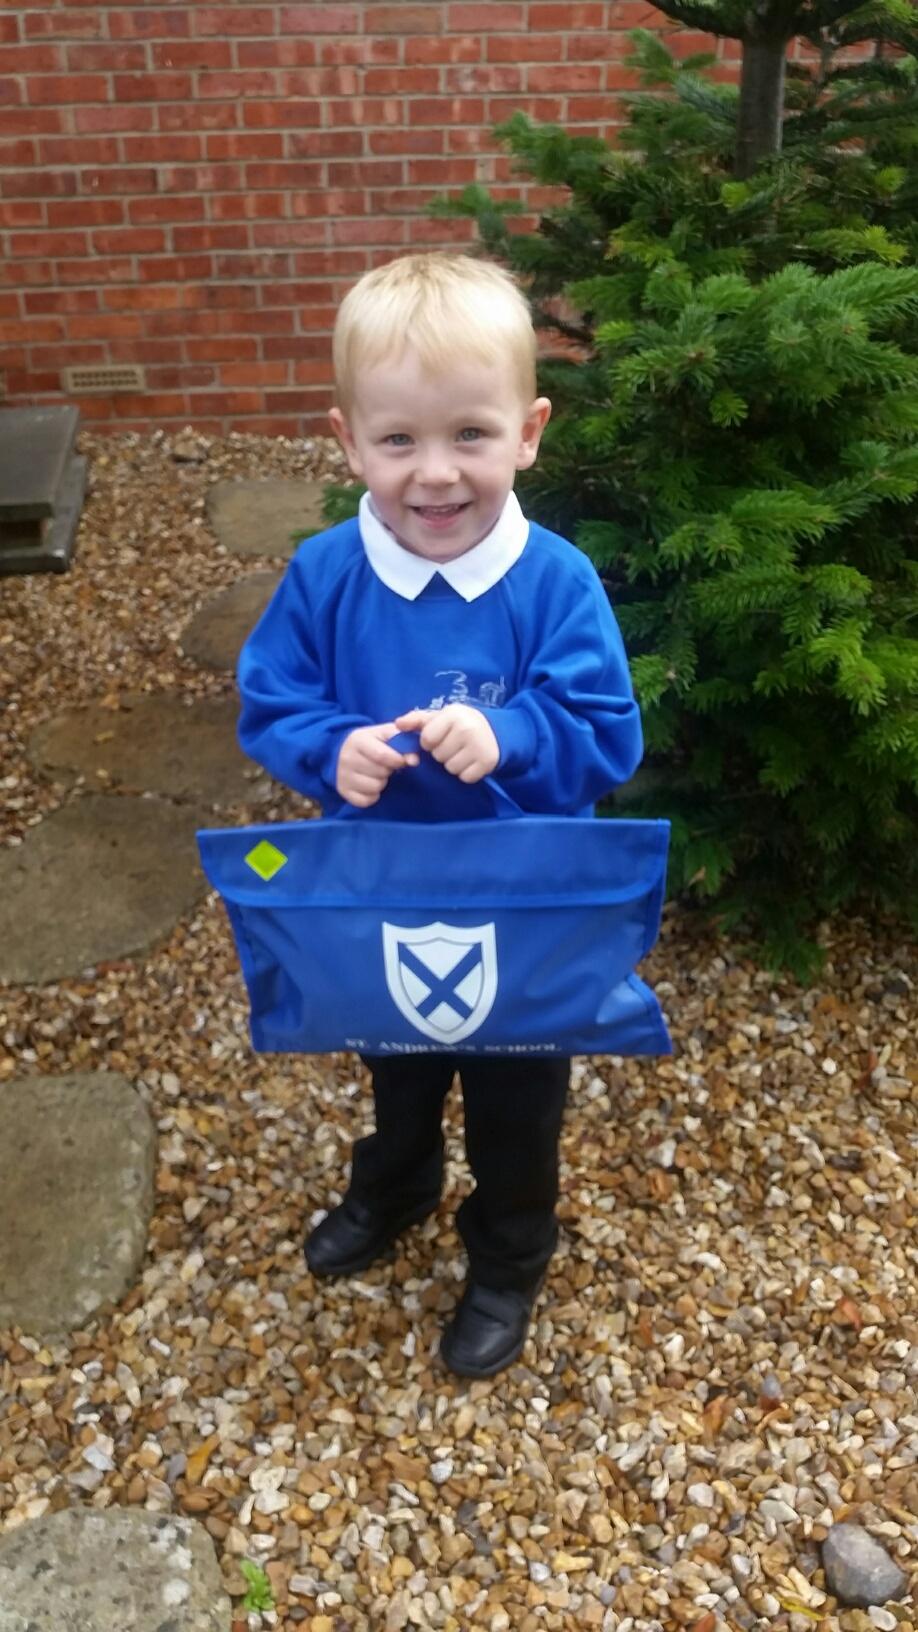 Lucas Hampson on his first day of school today at St Andrews